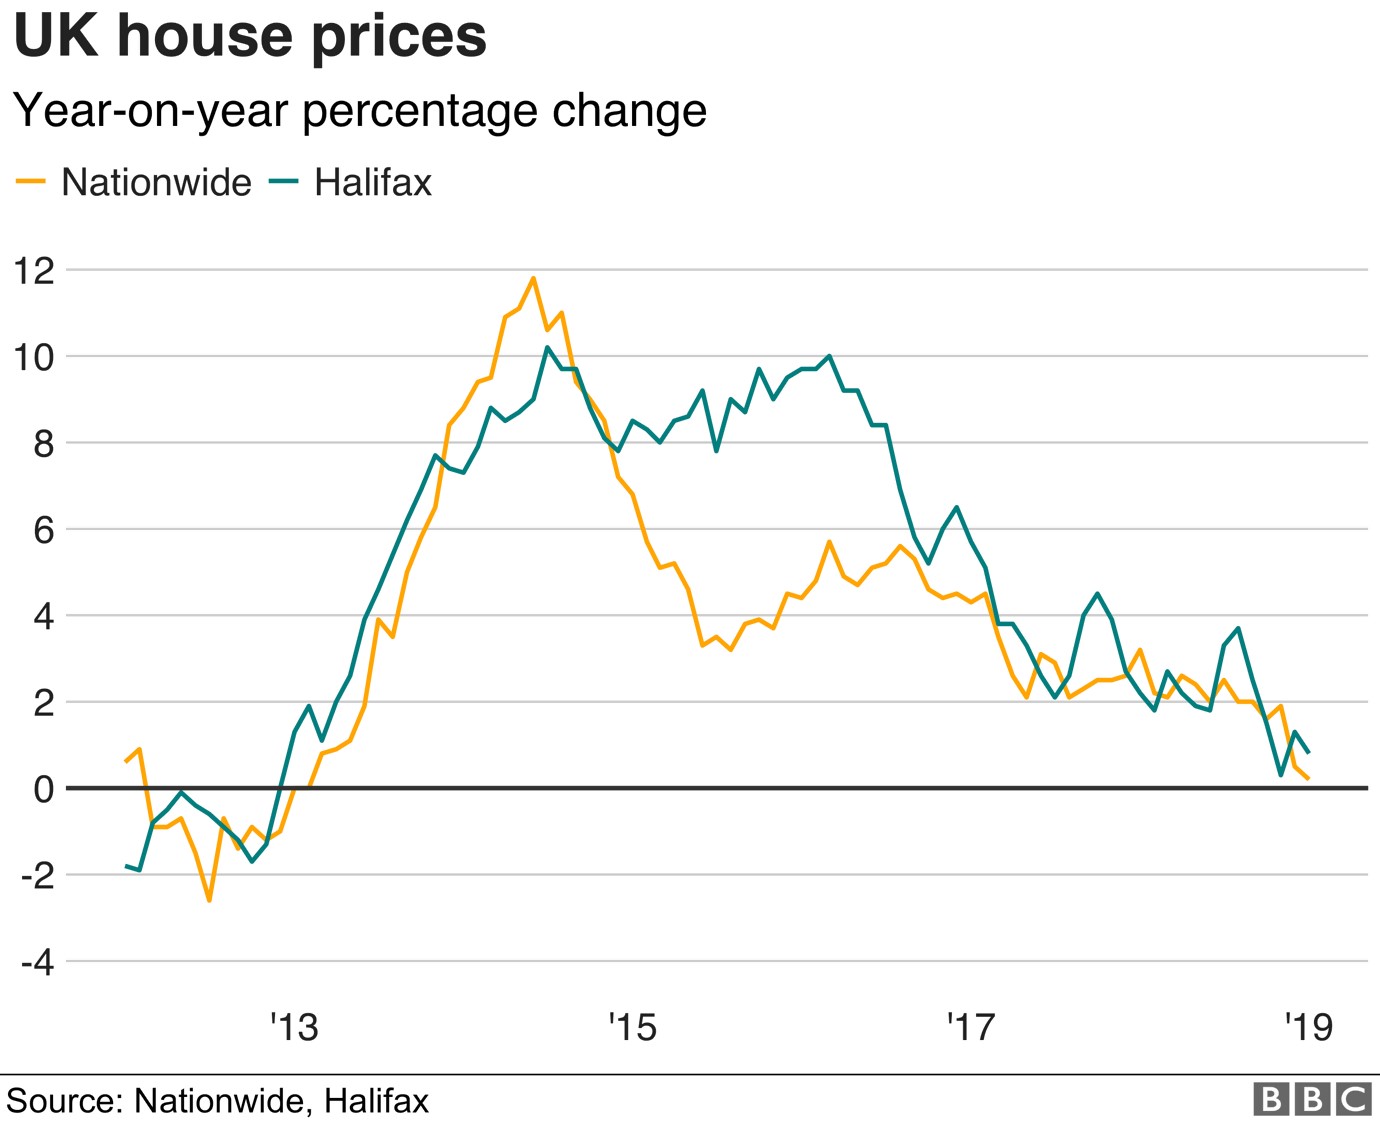 uk house prices from 2013 to 2019